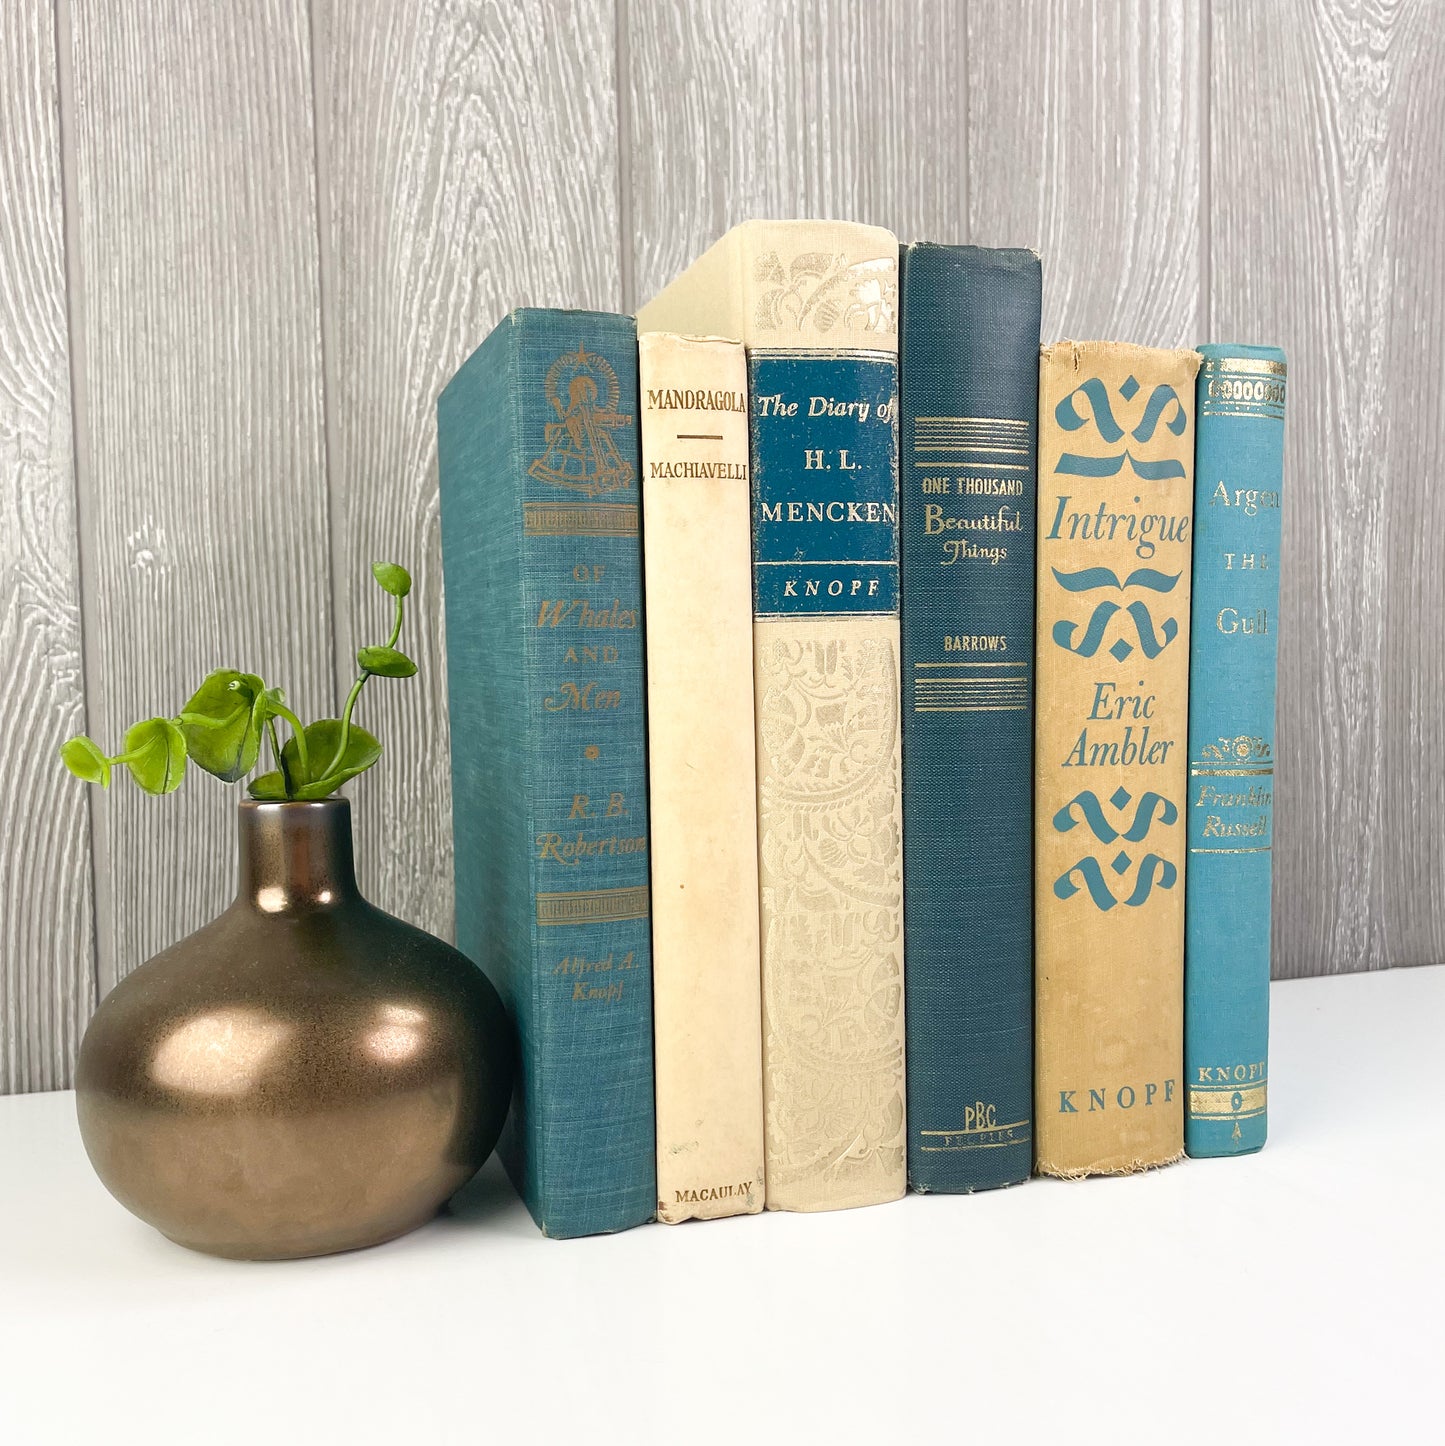 Blue and Cream Books for Decorative Accents